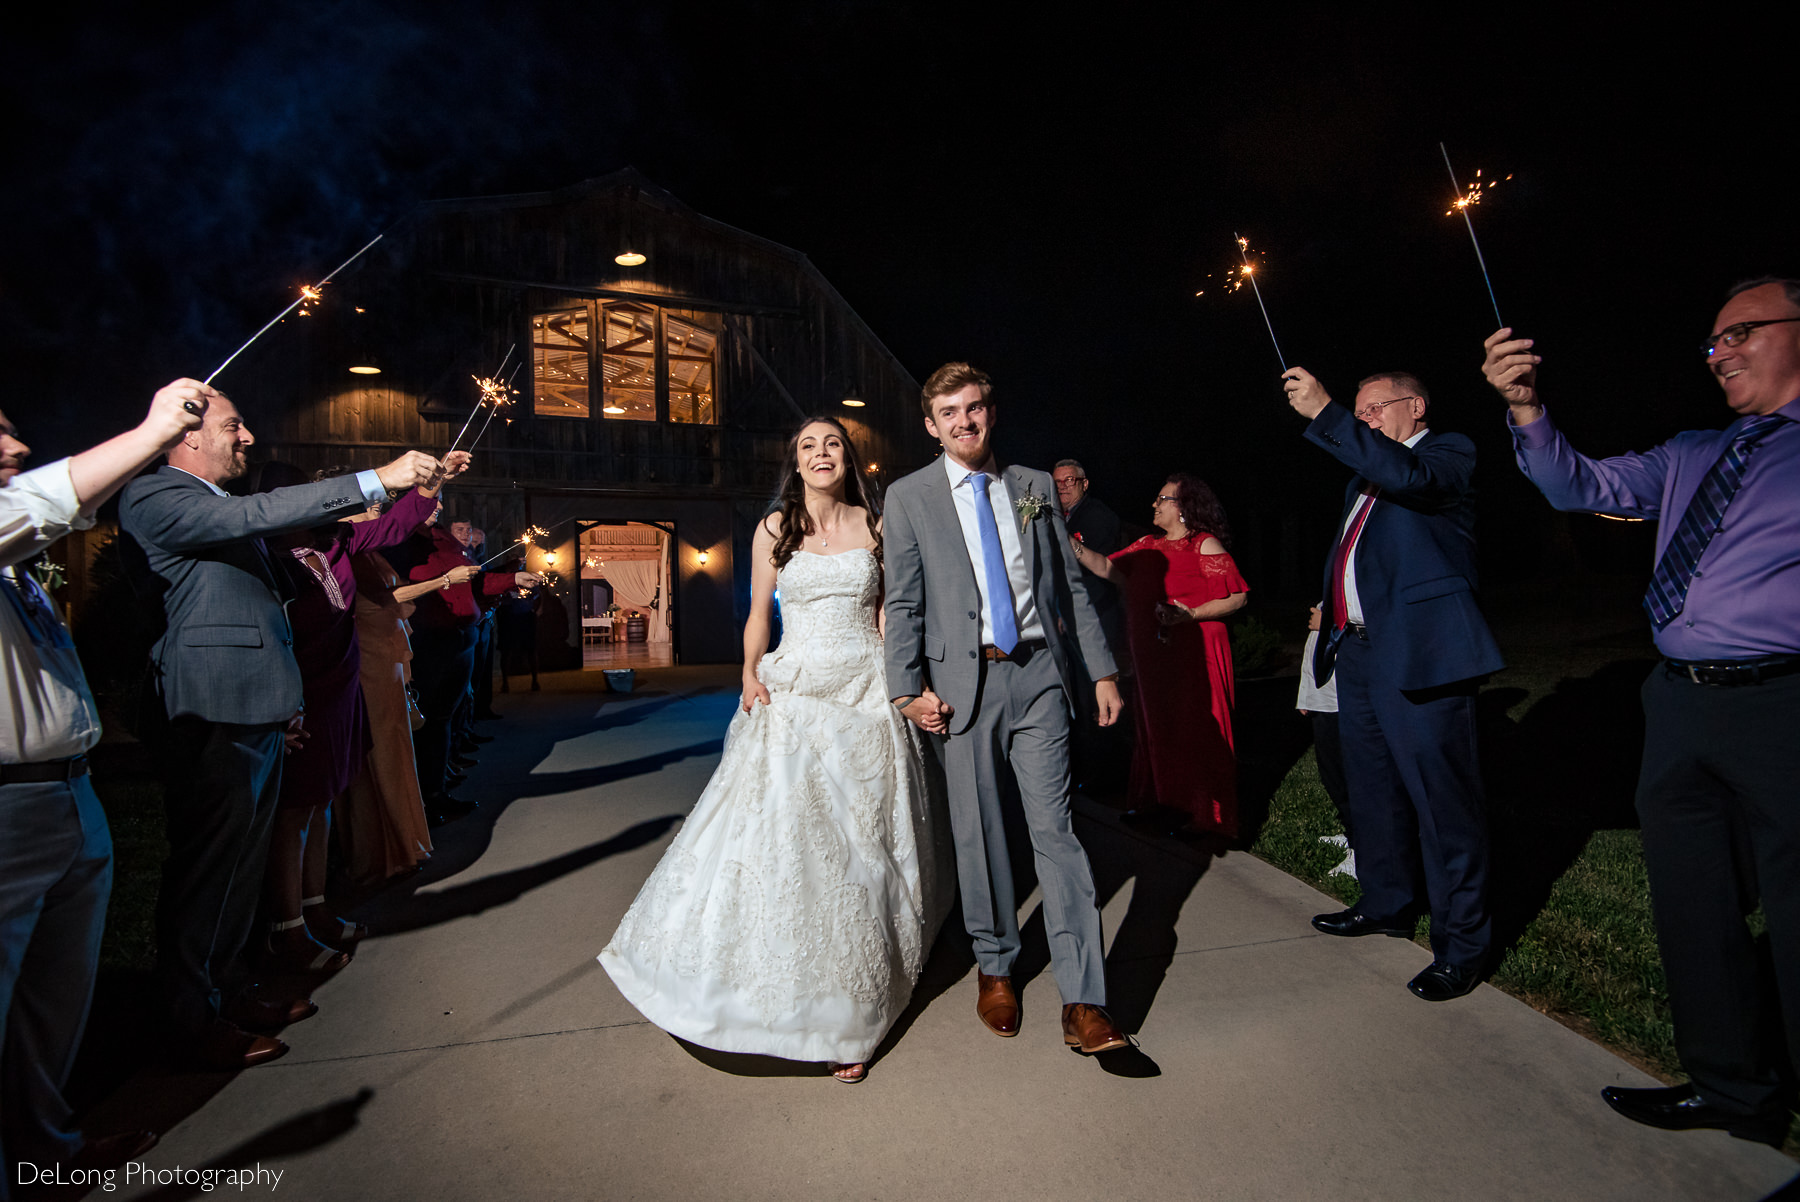 Bride and groom smiling walking out during their sparkler exit at Lady Bird Farms by Charlotte Wedding Photographers DeLong Photography